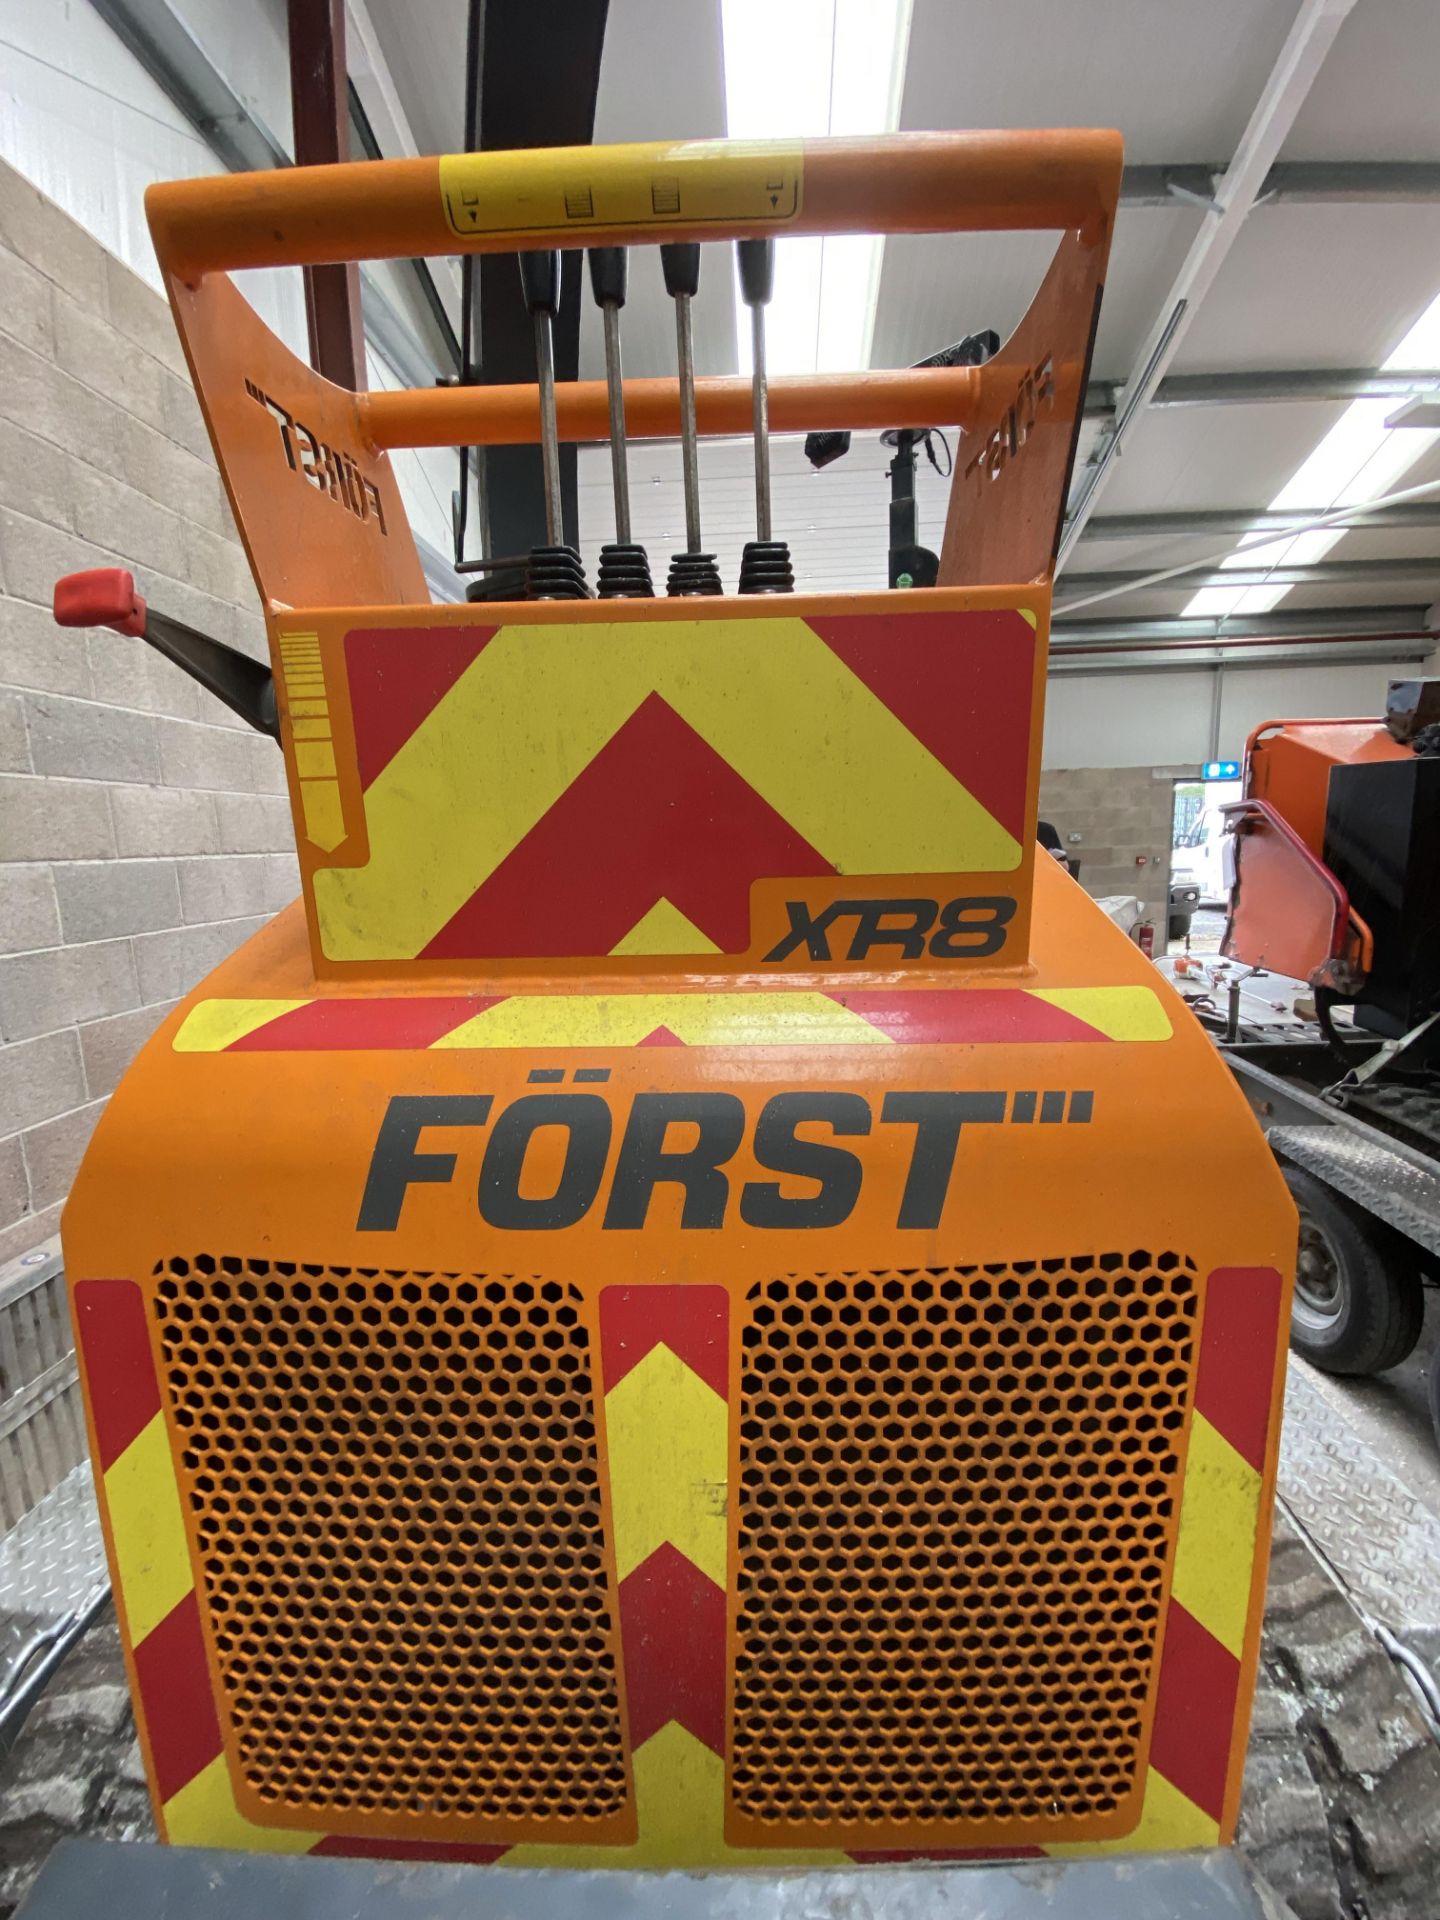 Forst XR8 TRACKED WOOD CHIPPER, serial no. SA9XR800000283167, year of manufacture 2018, weight 2, - Image 2 of 13